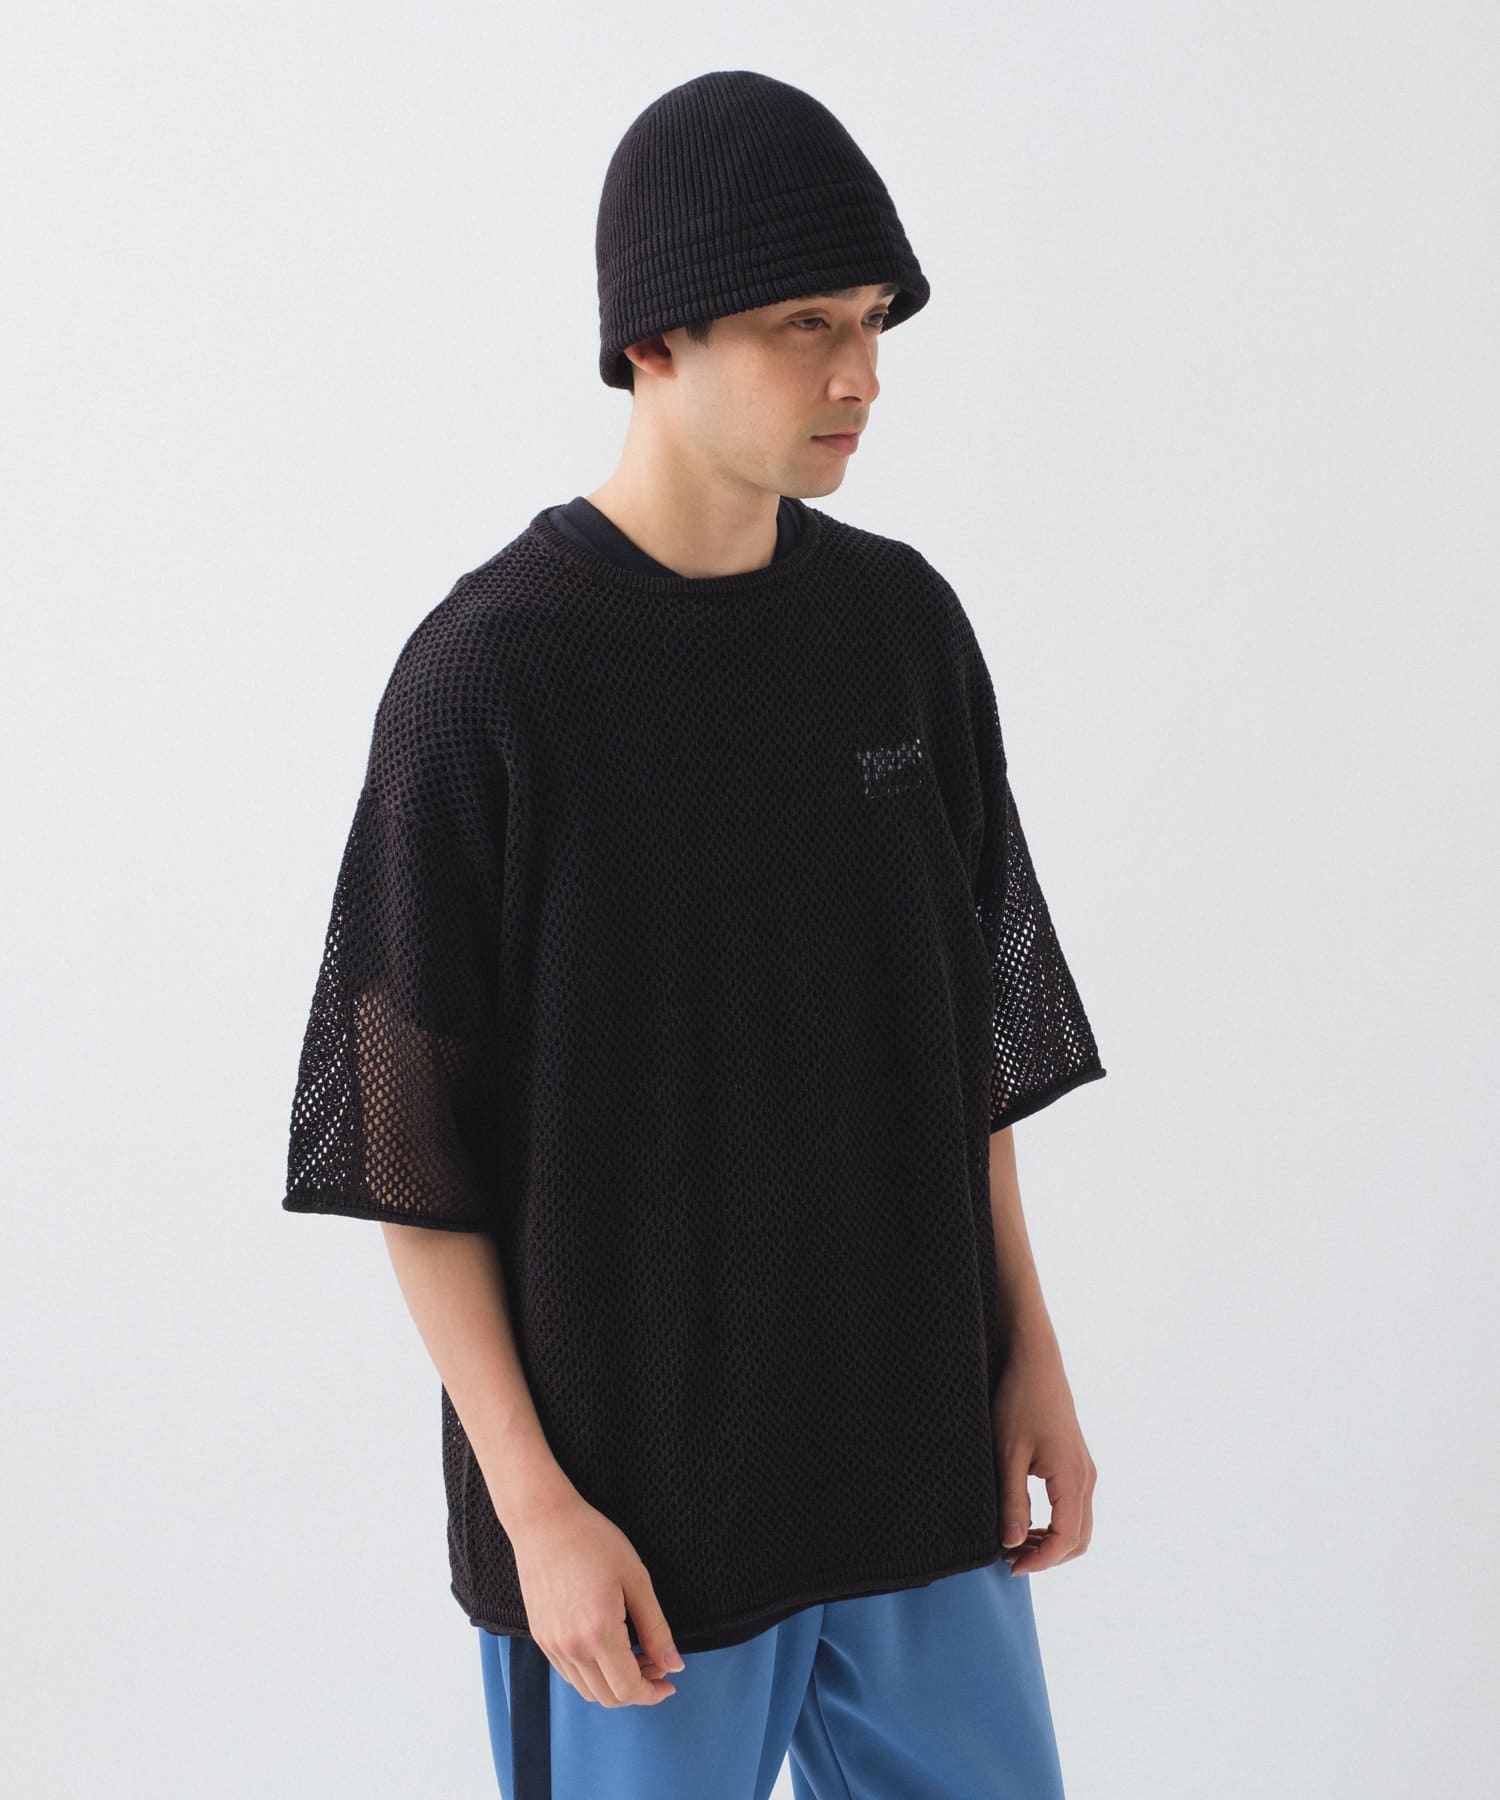 OUTLET(アウトレット) 【Kastane】【WHIMSIC】MESH KNIT T-SHIRT